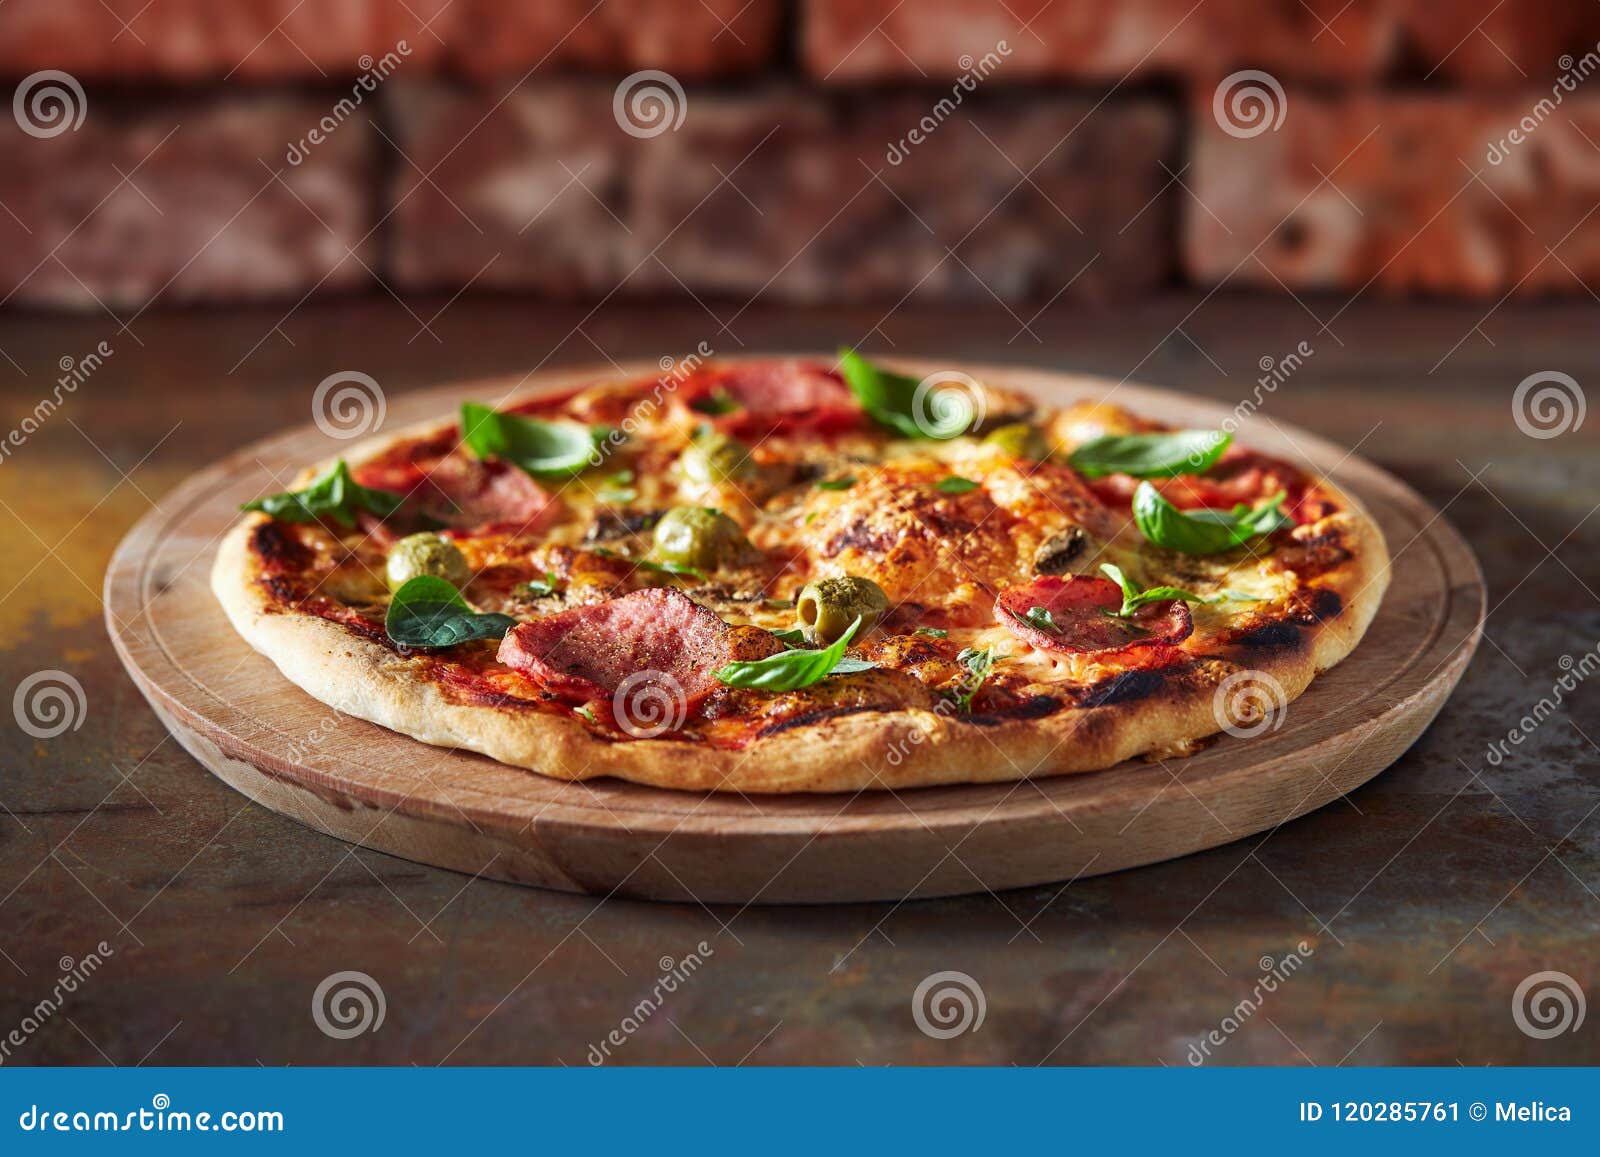 thin crust pizza with ham, cheese and olive